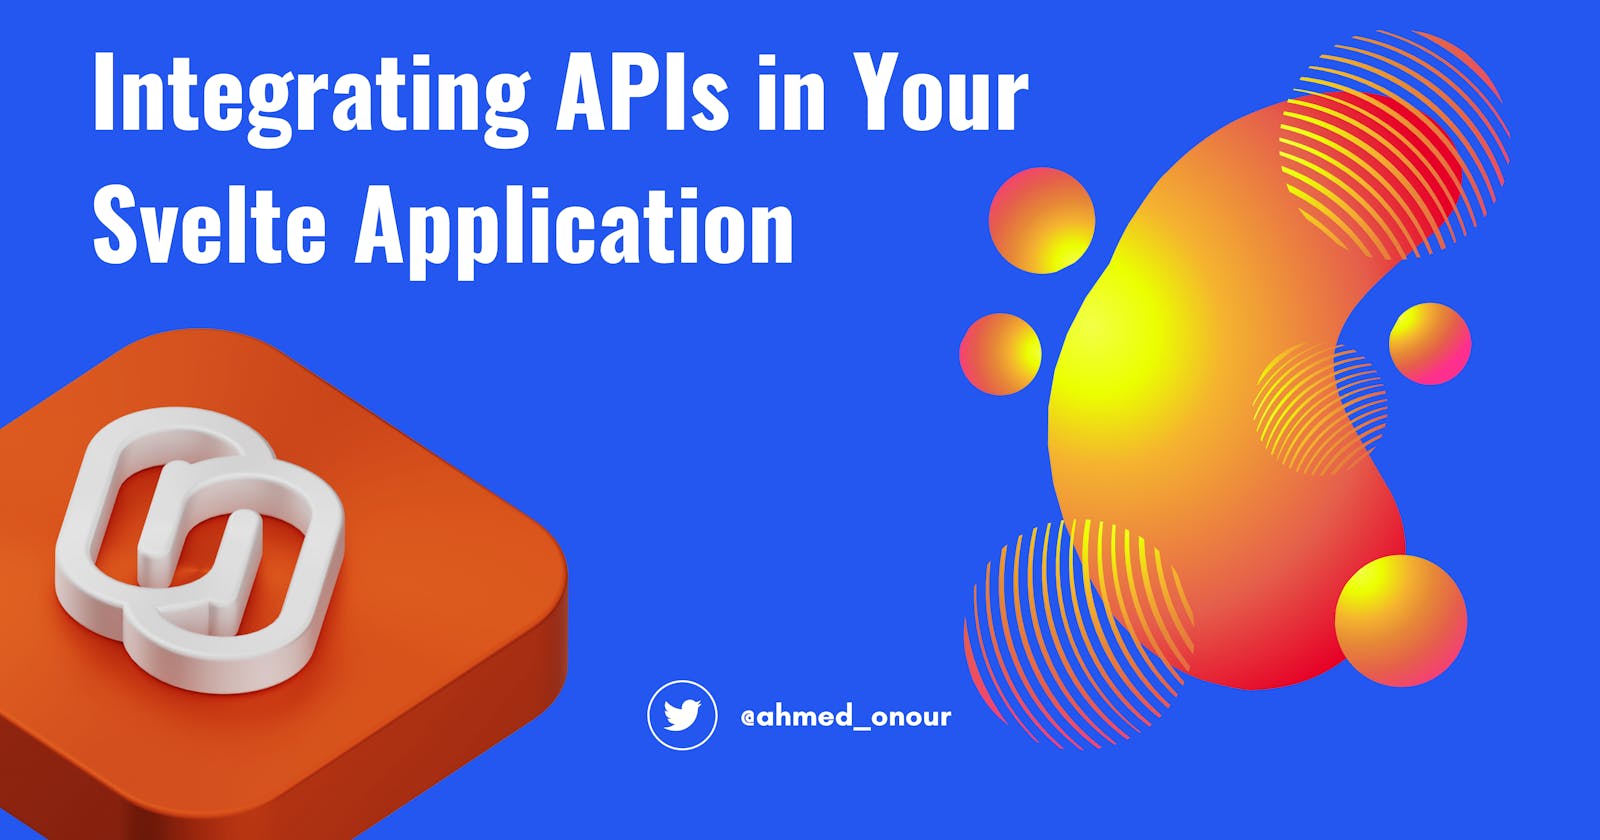 Integrating APIs in Your Svelte Application